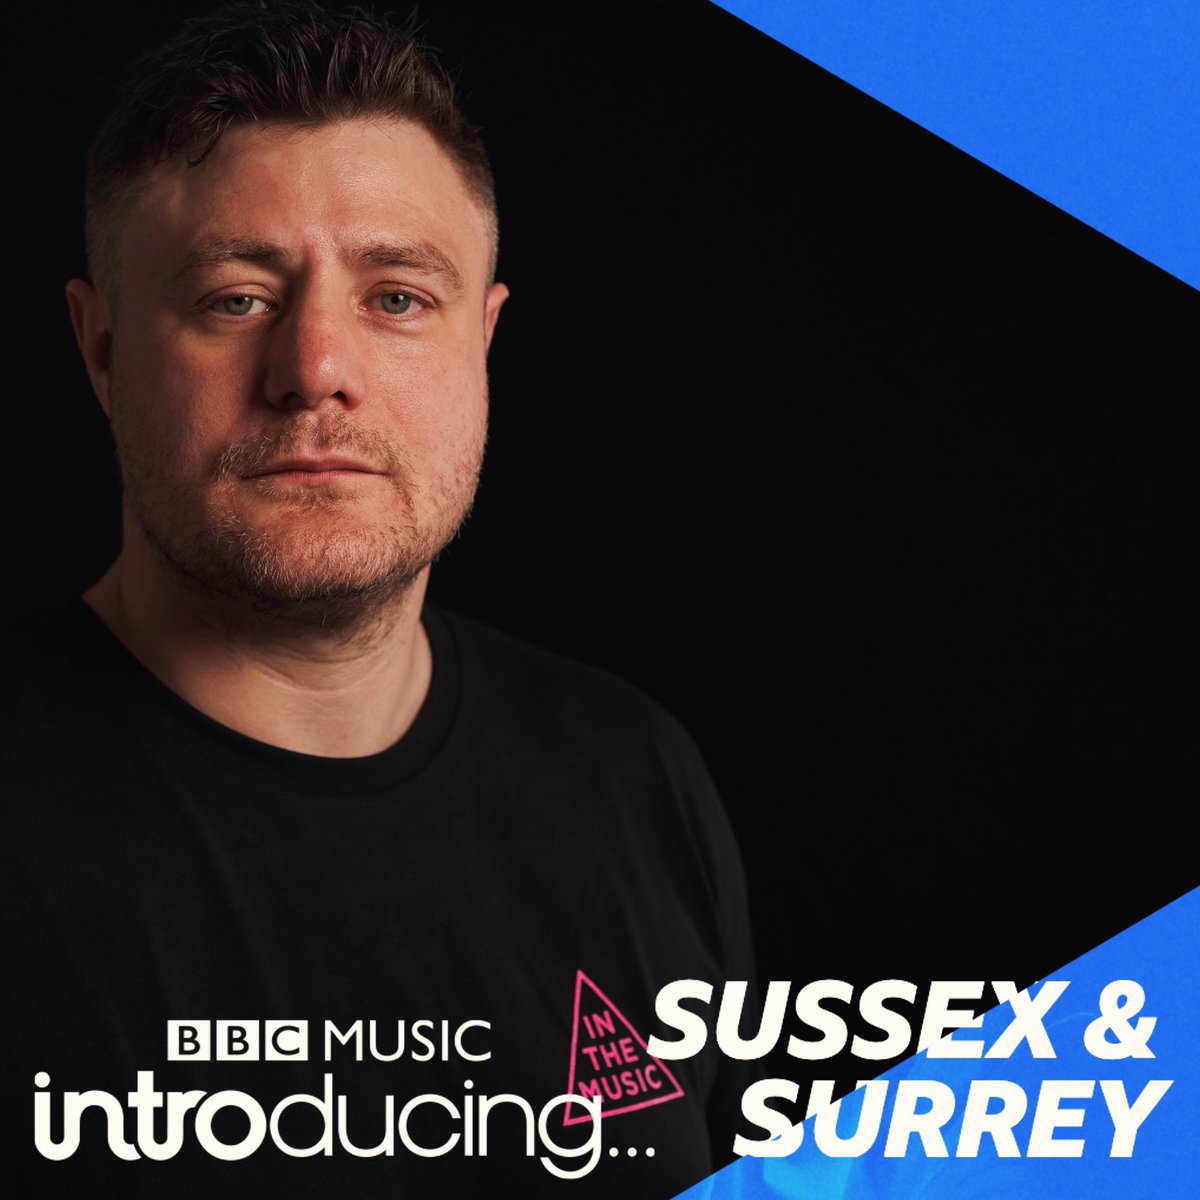 Pleased to say I am back on the wireless this Thursday @bbcintroducing thanks @melitadennett for the continued support. ‘Set me free’ is out now on @vivifierrecordsuk ❤️ BBC Introducing in Sussex & Surrey, 8-10pm Thursdays